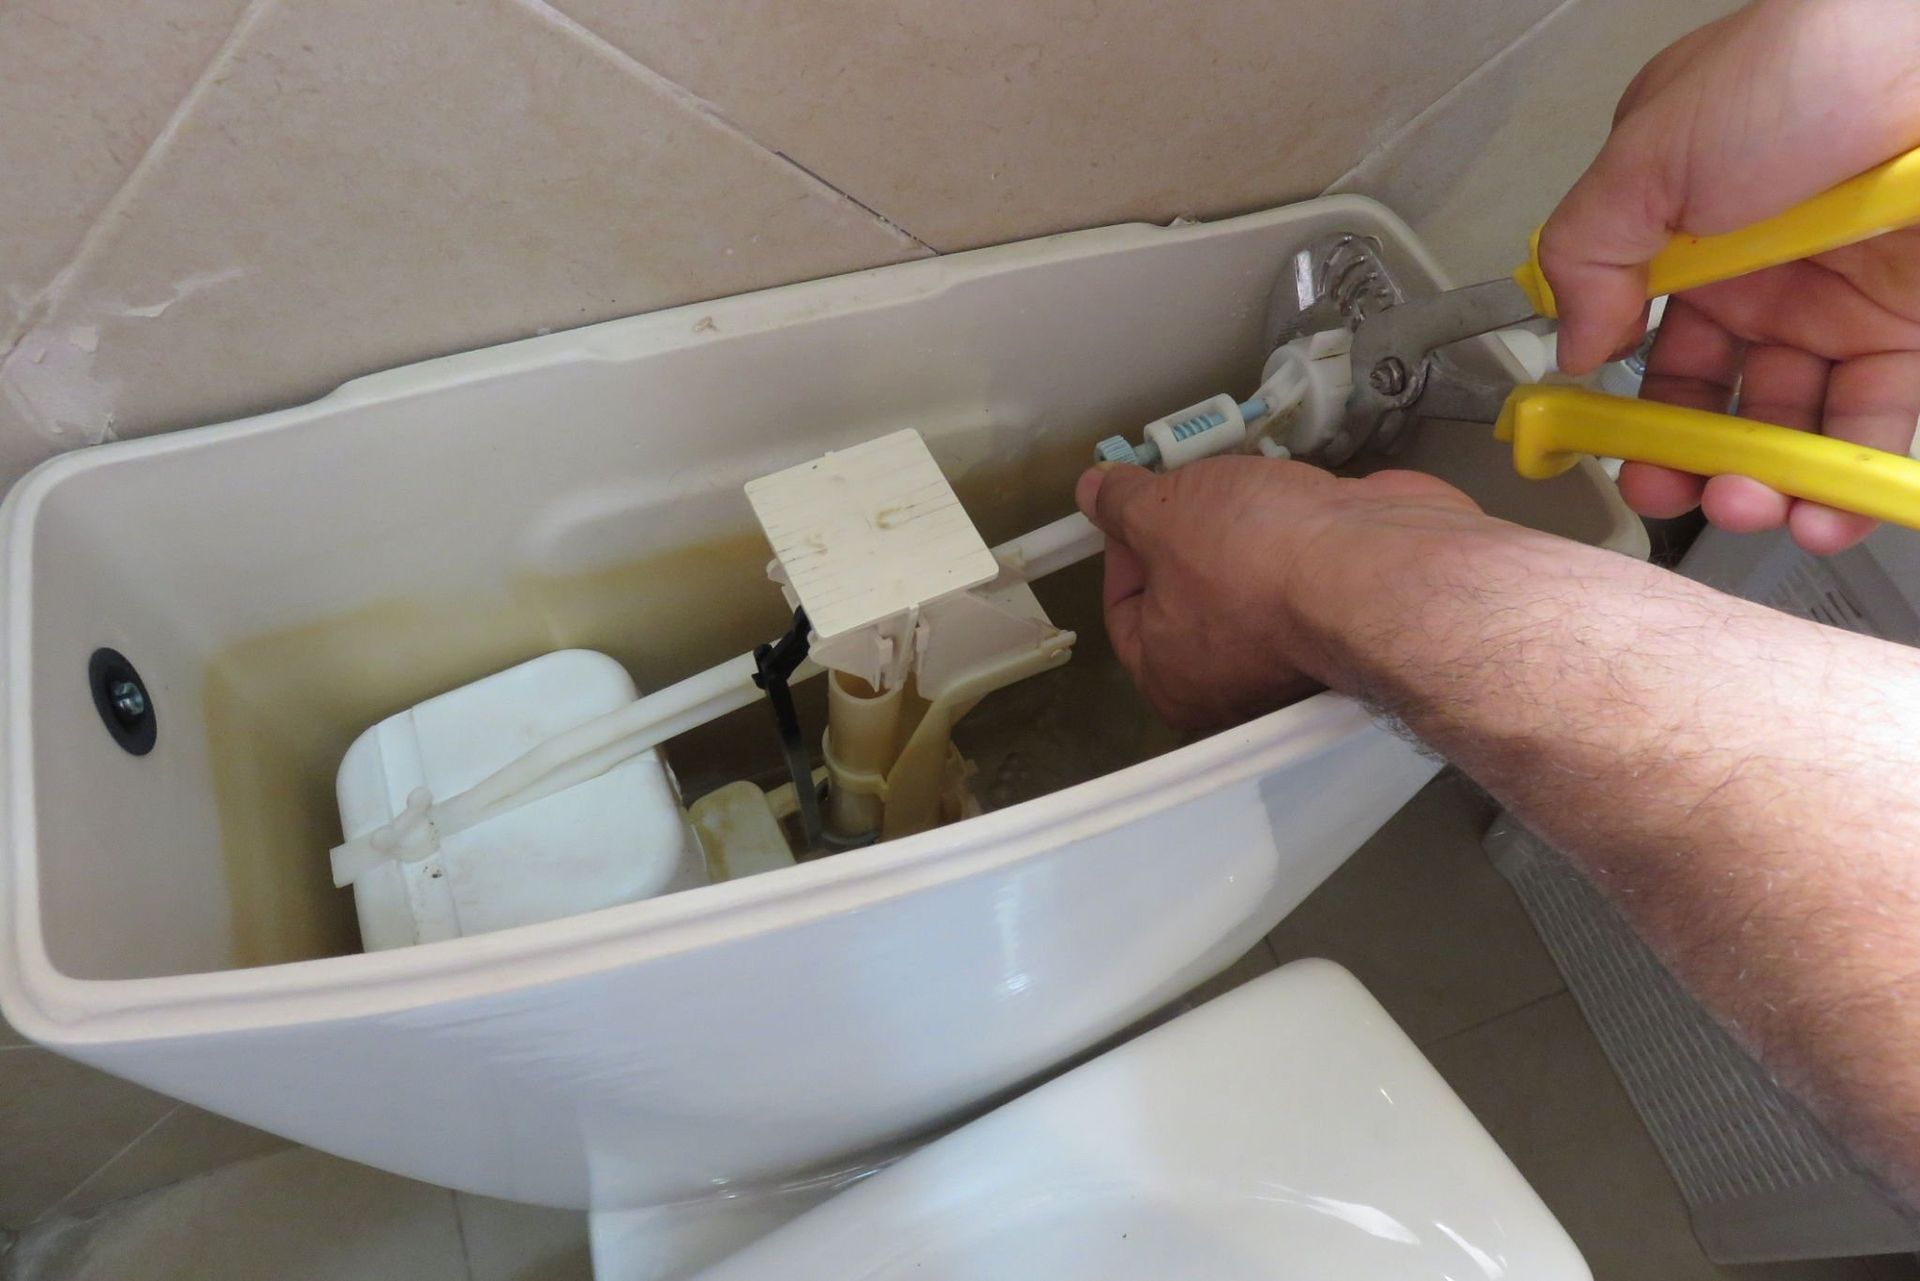 Tier One Plumbing solutions offers Toilet Repair & Installation servicing TN